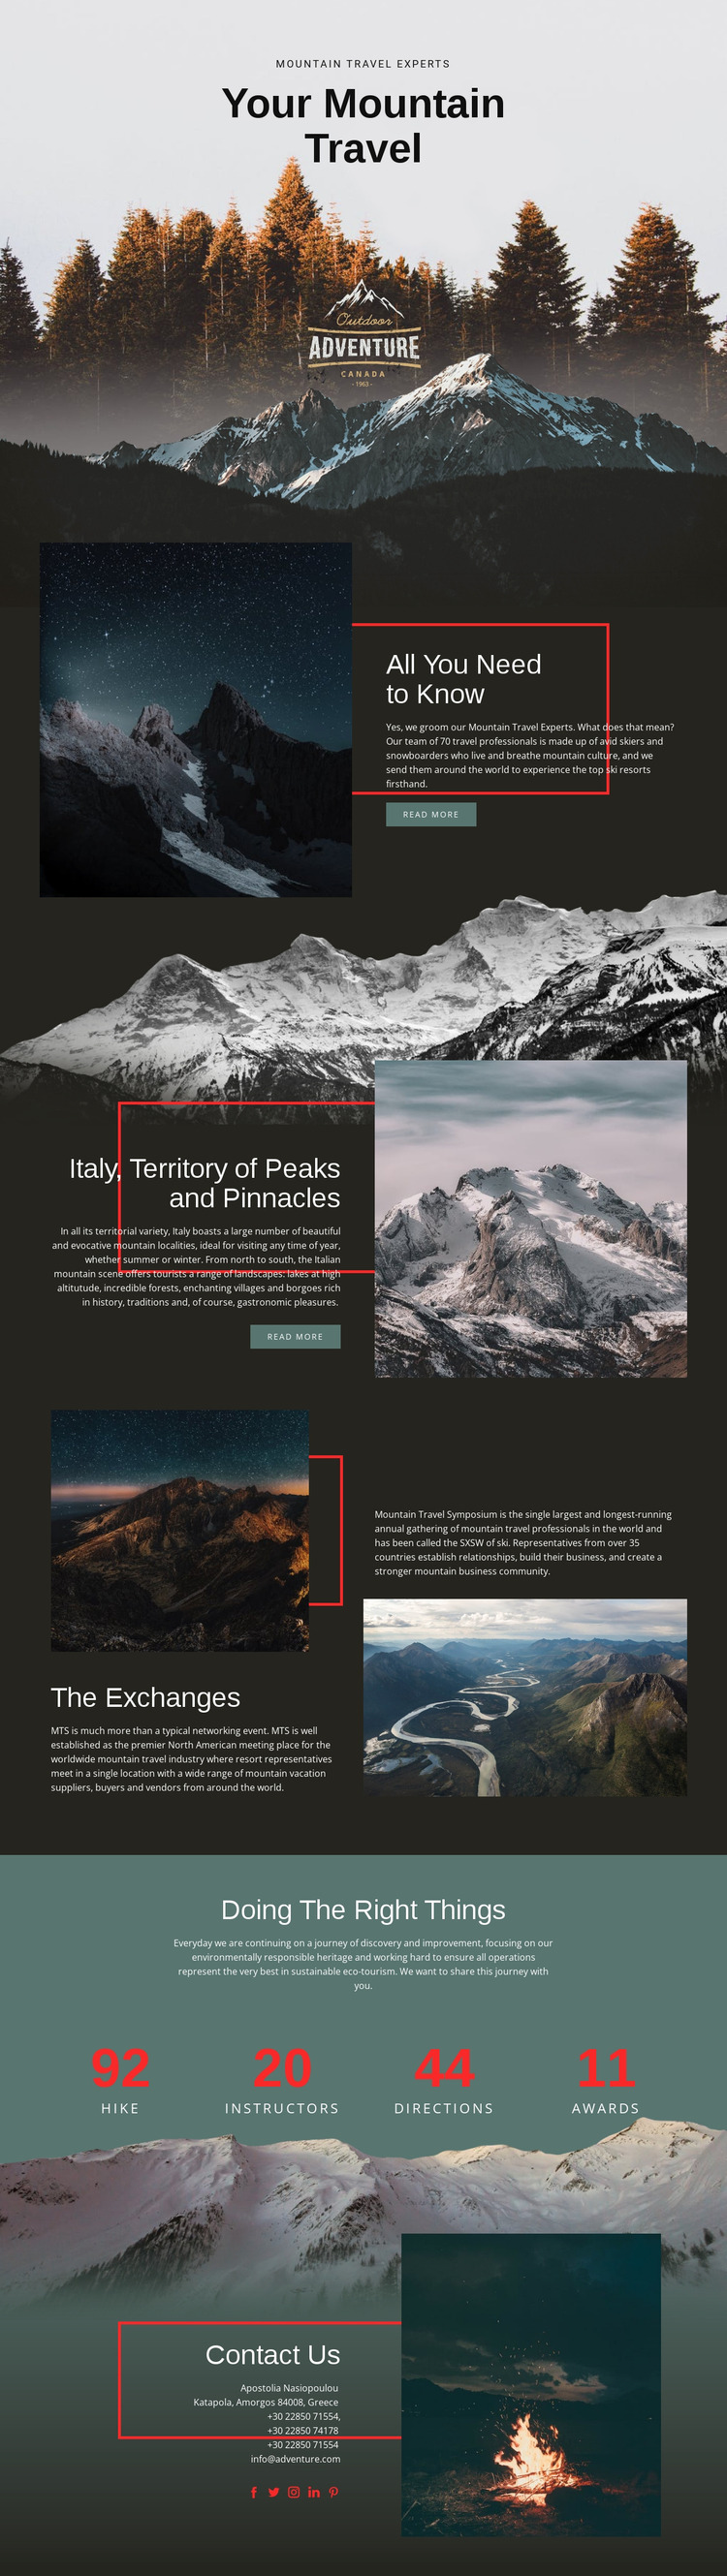 All about mountain travel Website Mockup